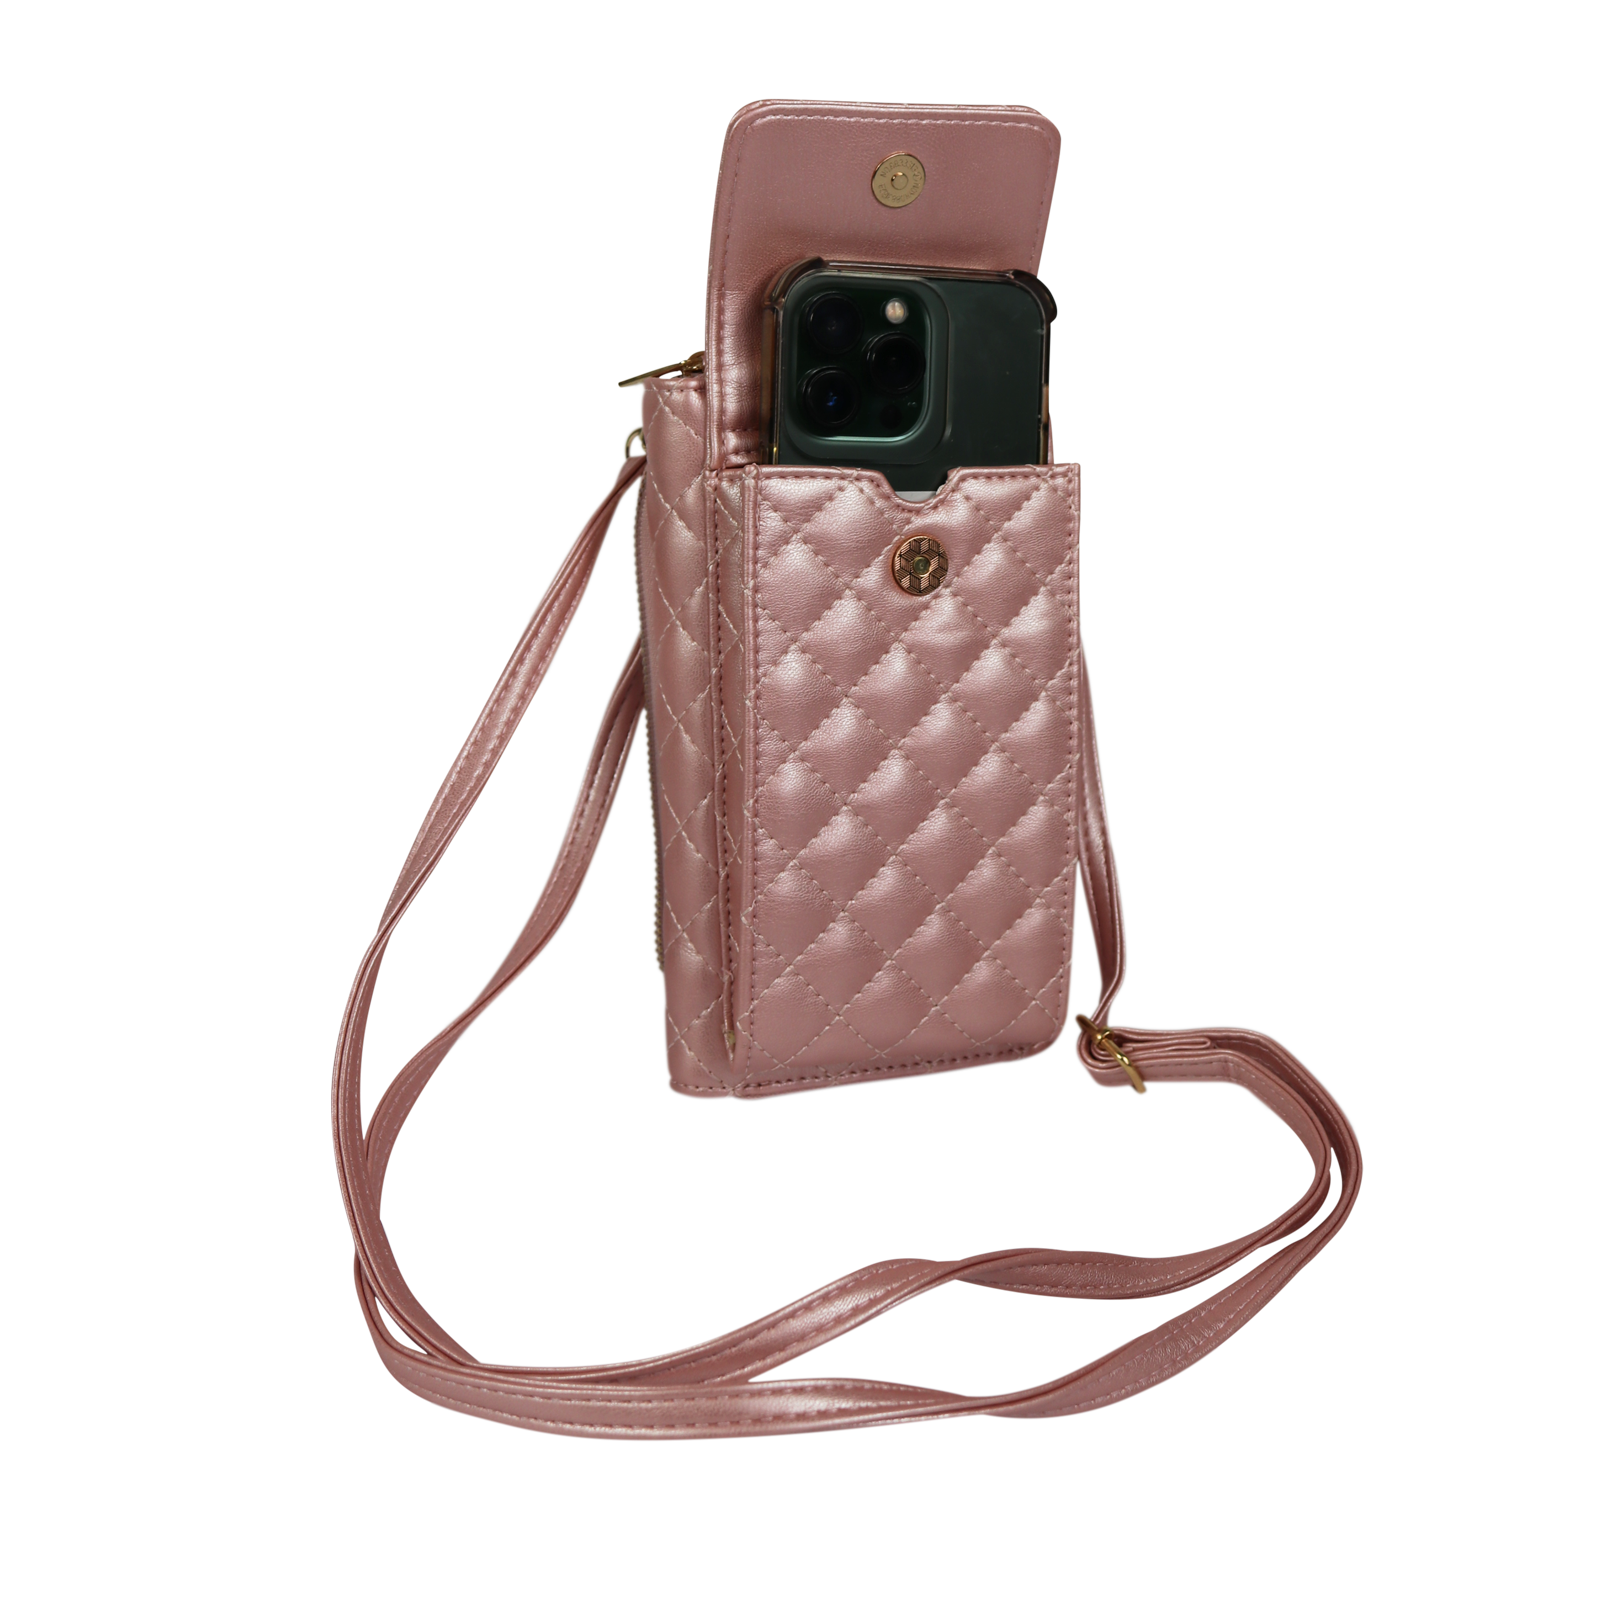 Leather Phone Purse Too - Black Phone Case - Black Leather Crossbody w –  Beaudin Designs